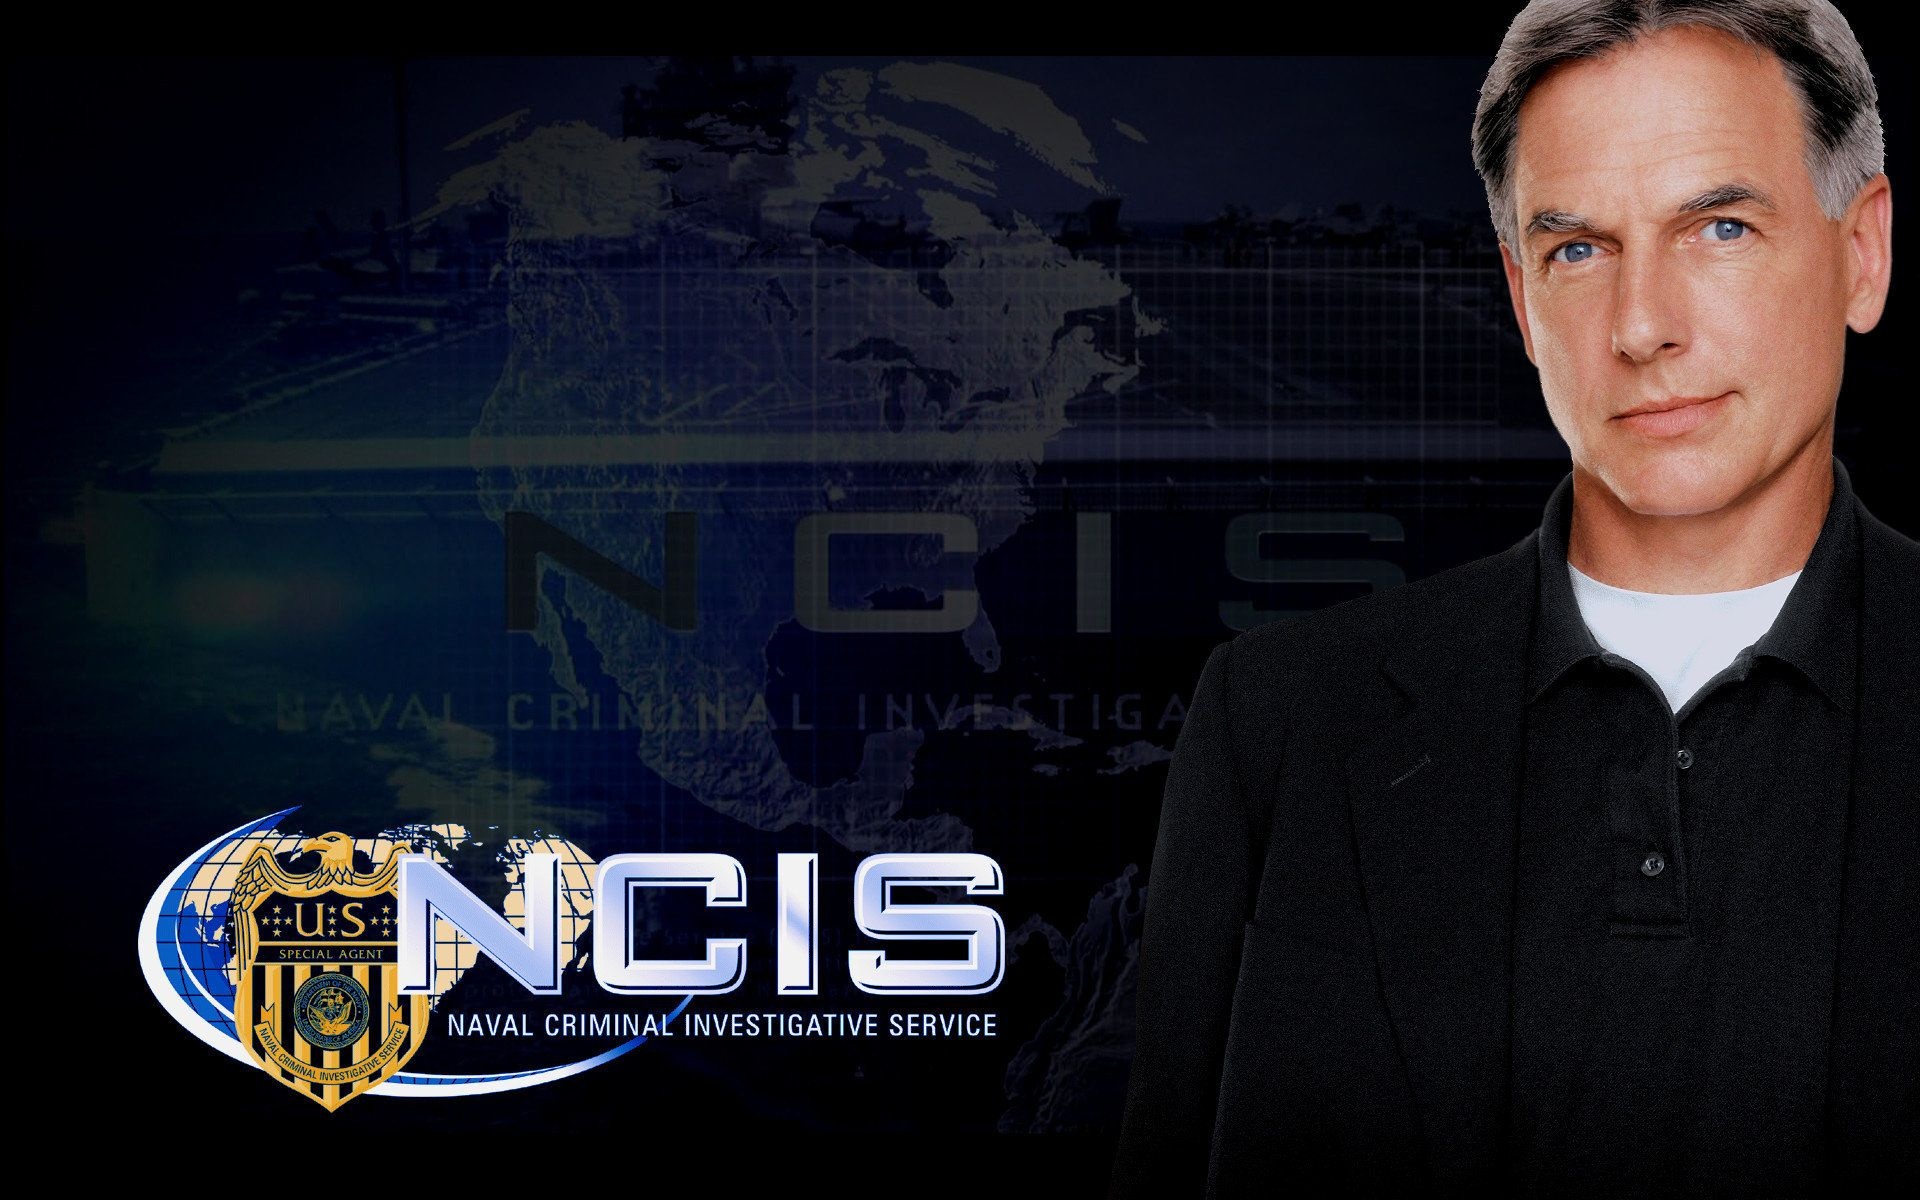 NCIS: Naval Criminal Investigative Service: Leroy Jethro Gibbs, Poster, A former NCIS Special Agent in Charge. 1920x1200 HD Wallpaper.